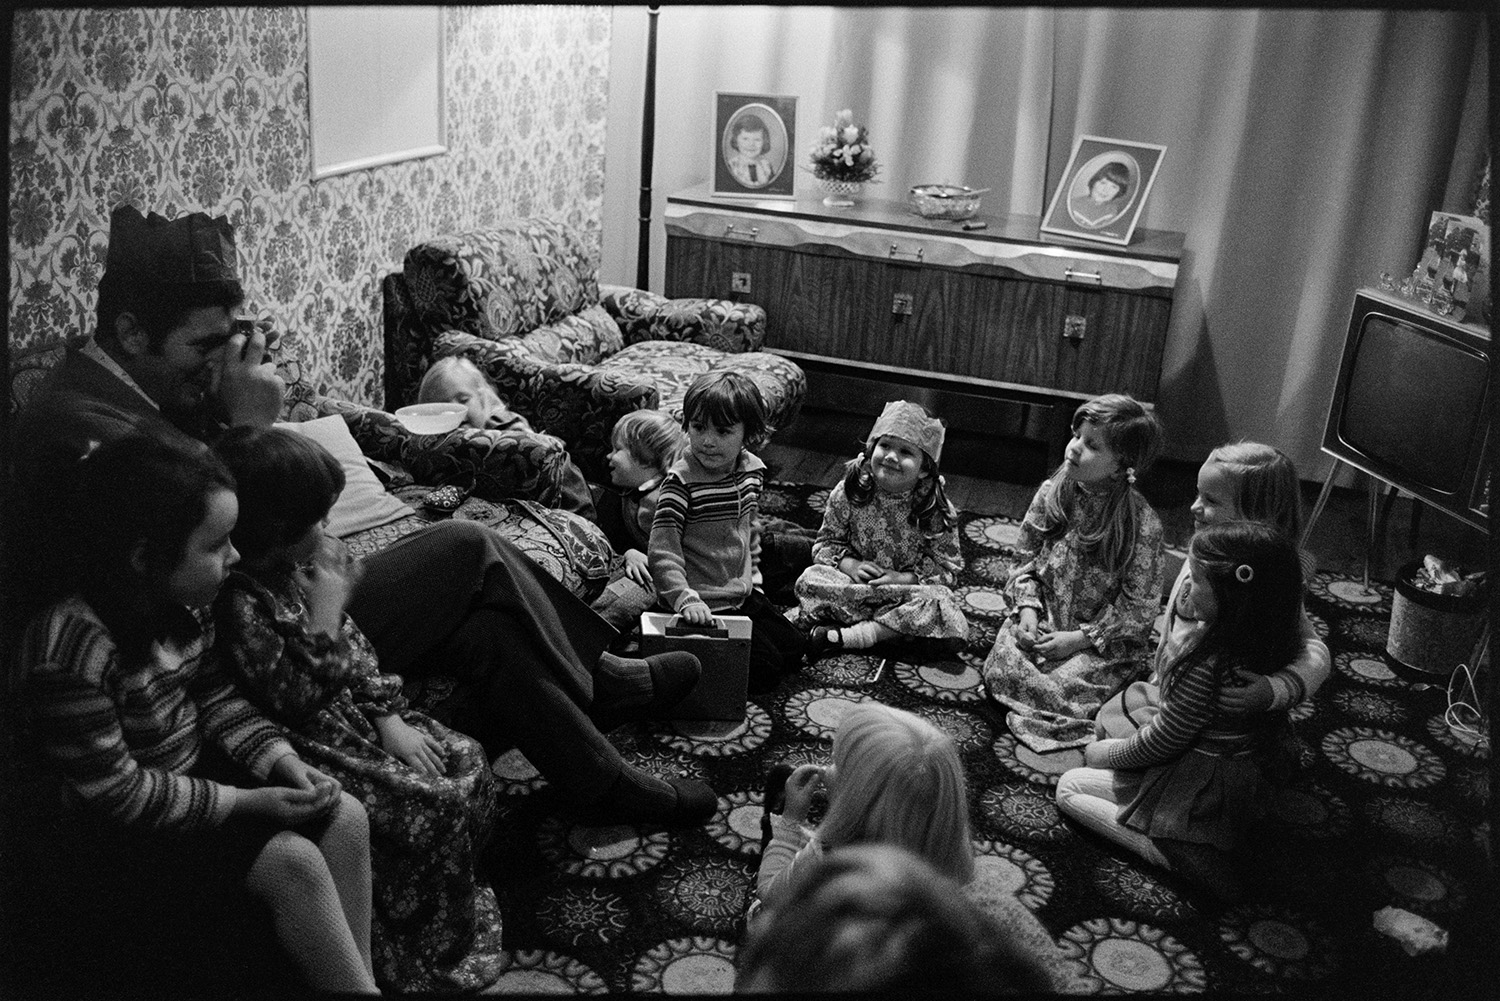 Children's party food on table. Birthday Party. 
[Children playing party games at a birthday party in the living room of a house at Rectory Road, Dolton. A man is taking a photograph of some of the children. A television and sideboard with photographs are visible in the background.]